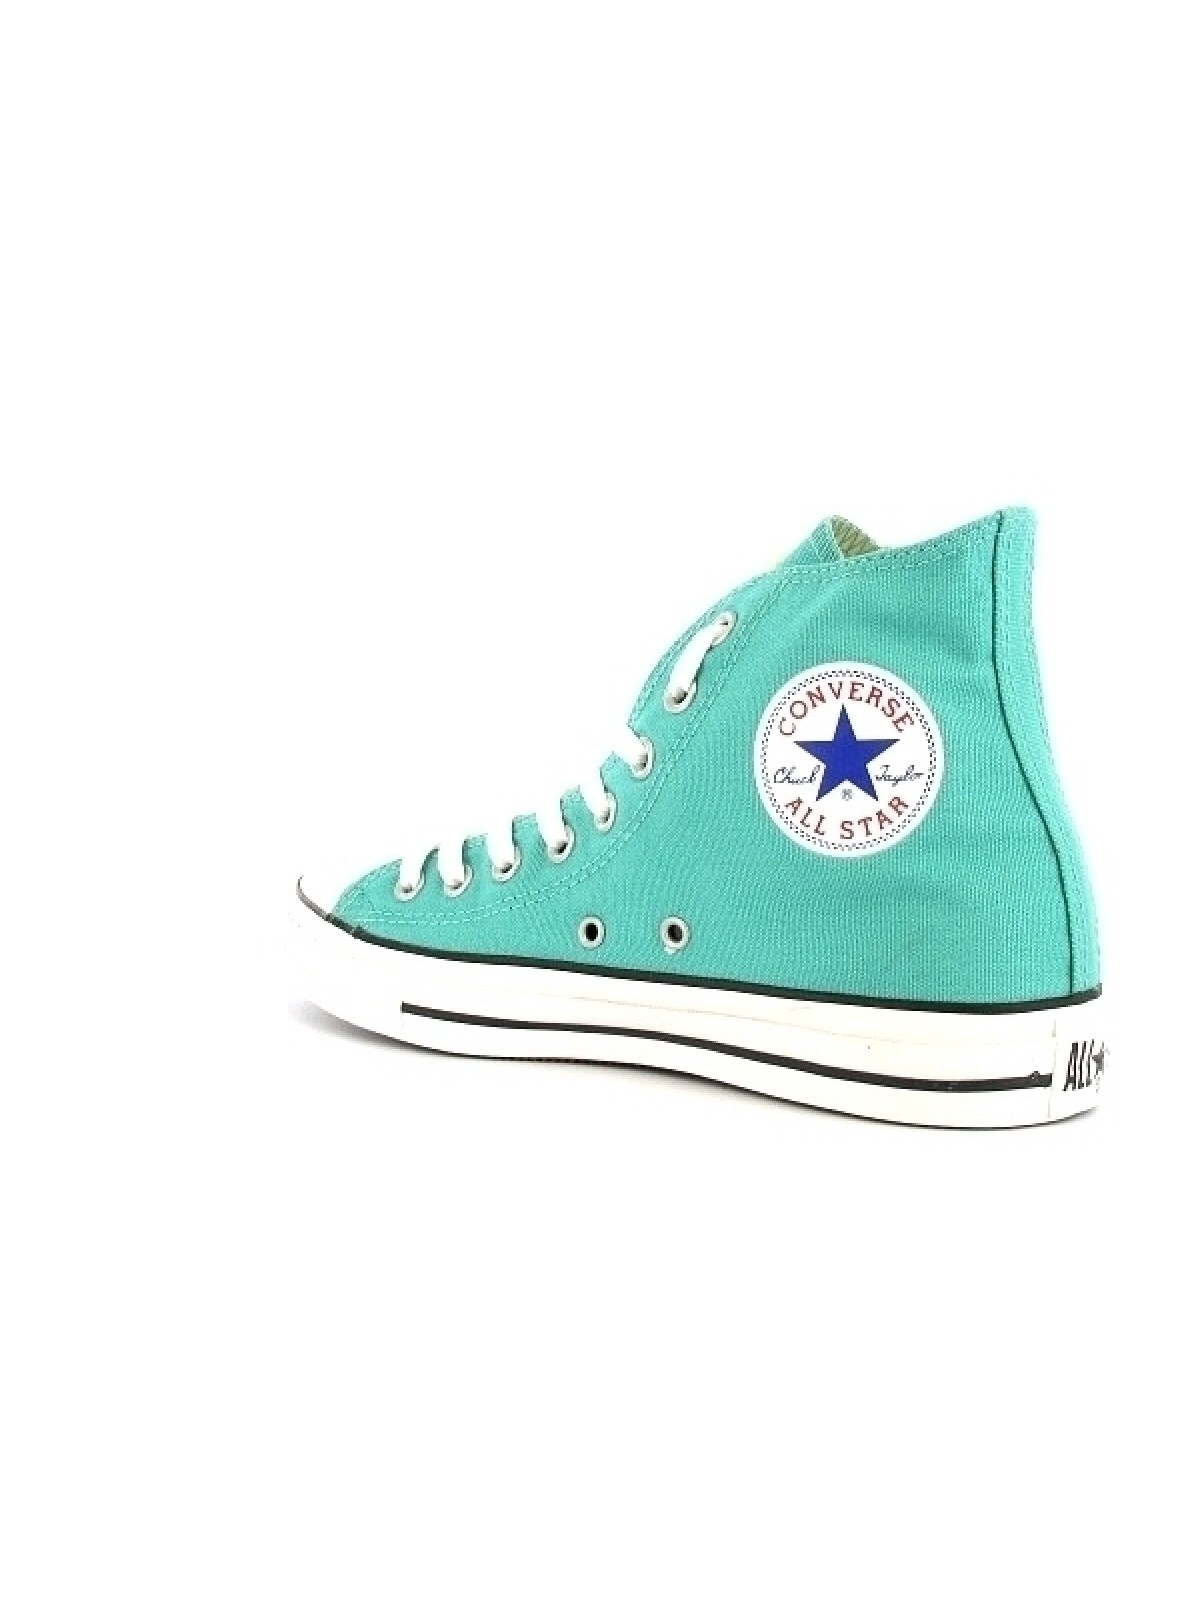 converse all star bleu turquoise